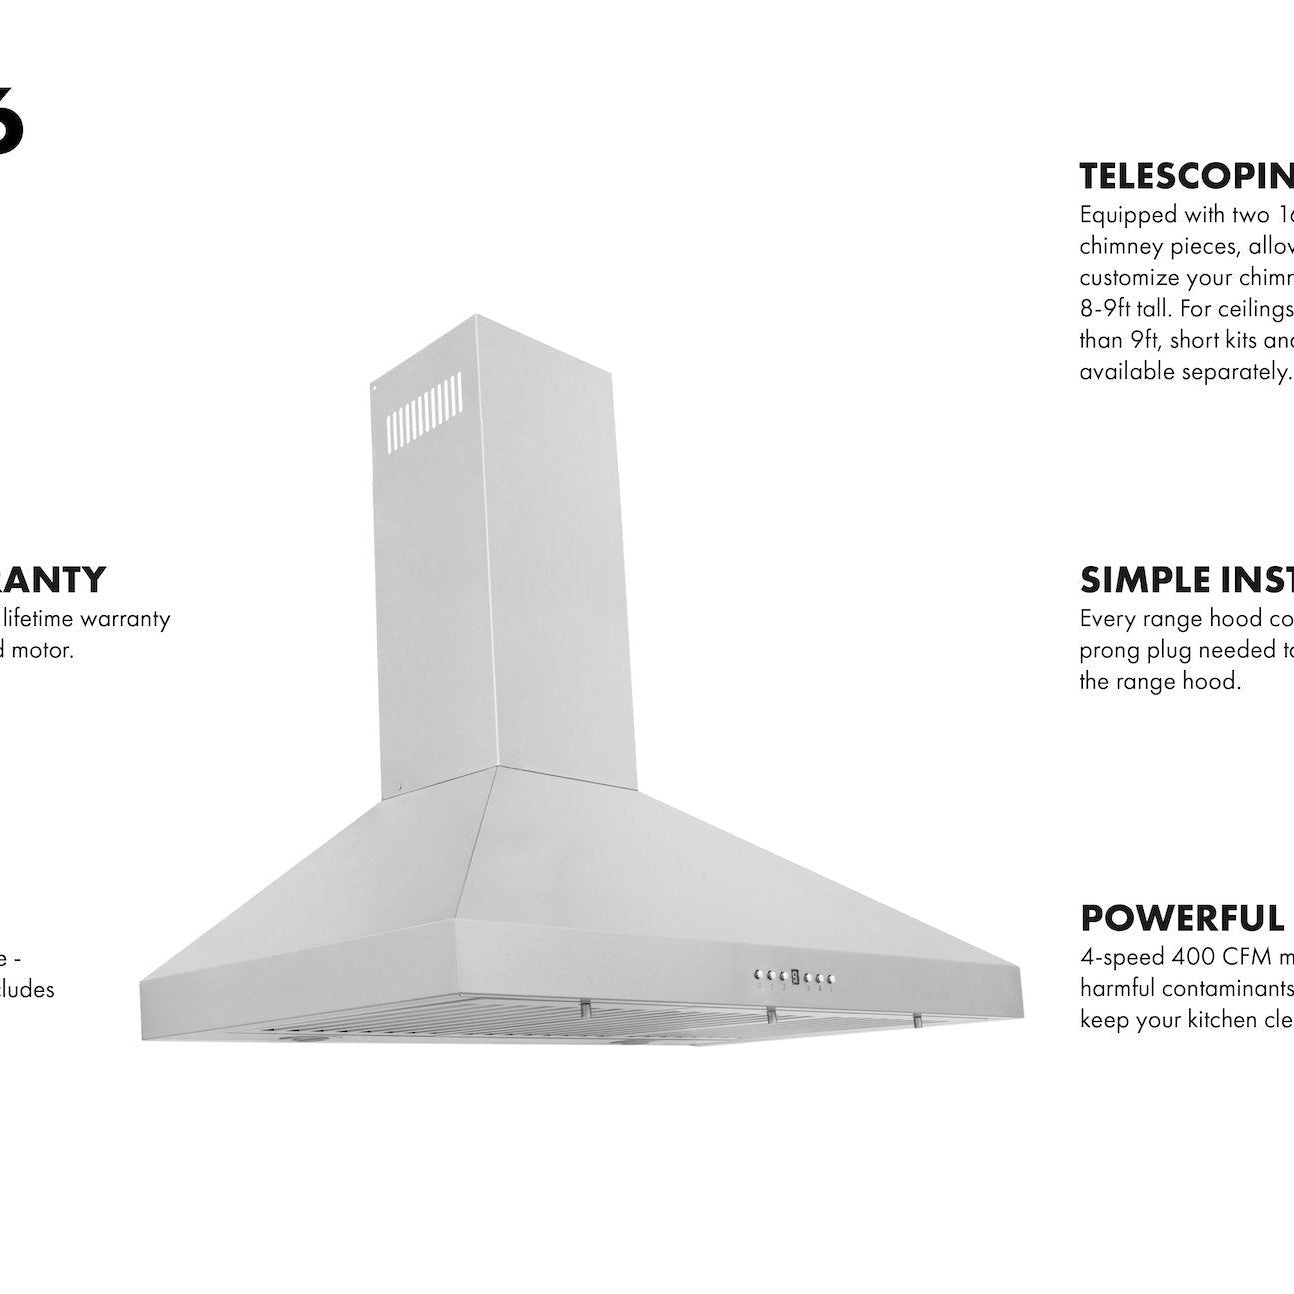 KL3-36 features lifetime warranty, LED lights, telescoping chimney, simple installation, and powerful motor.